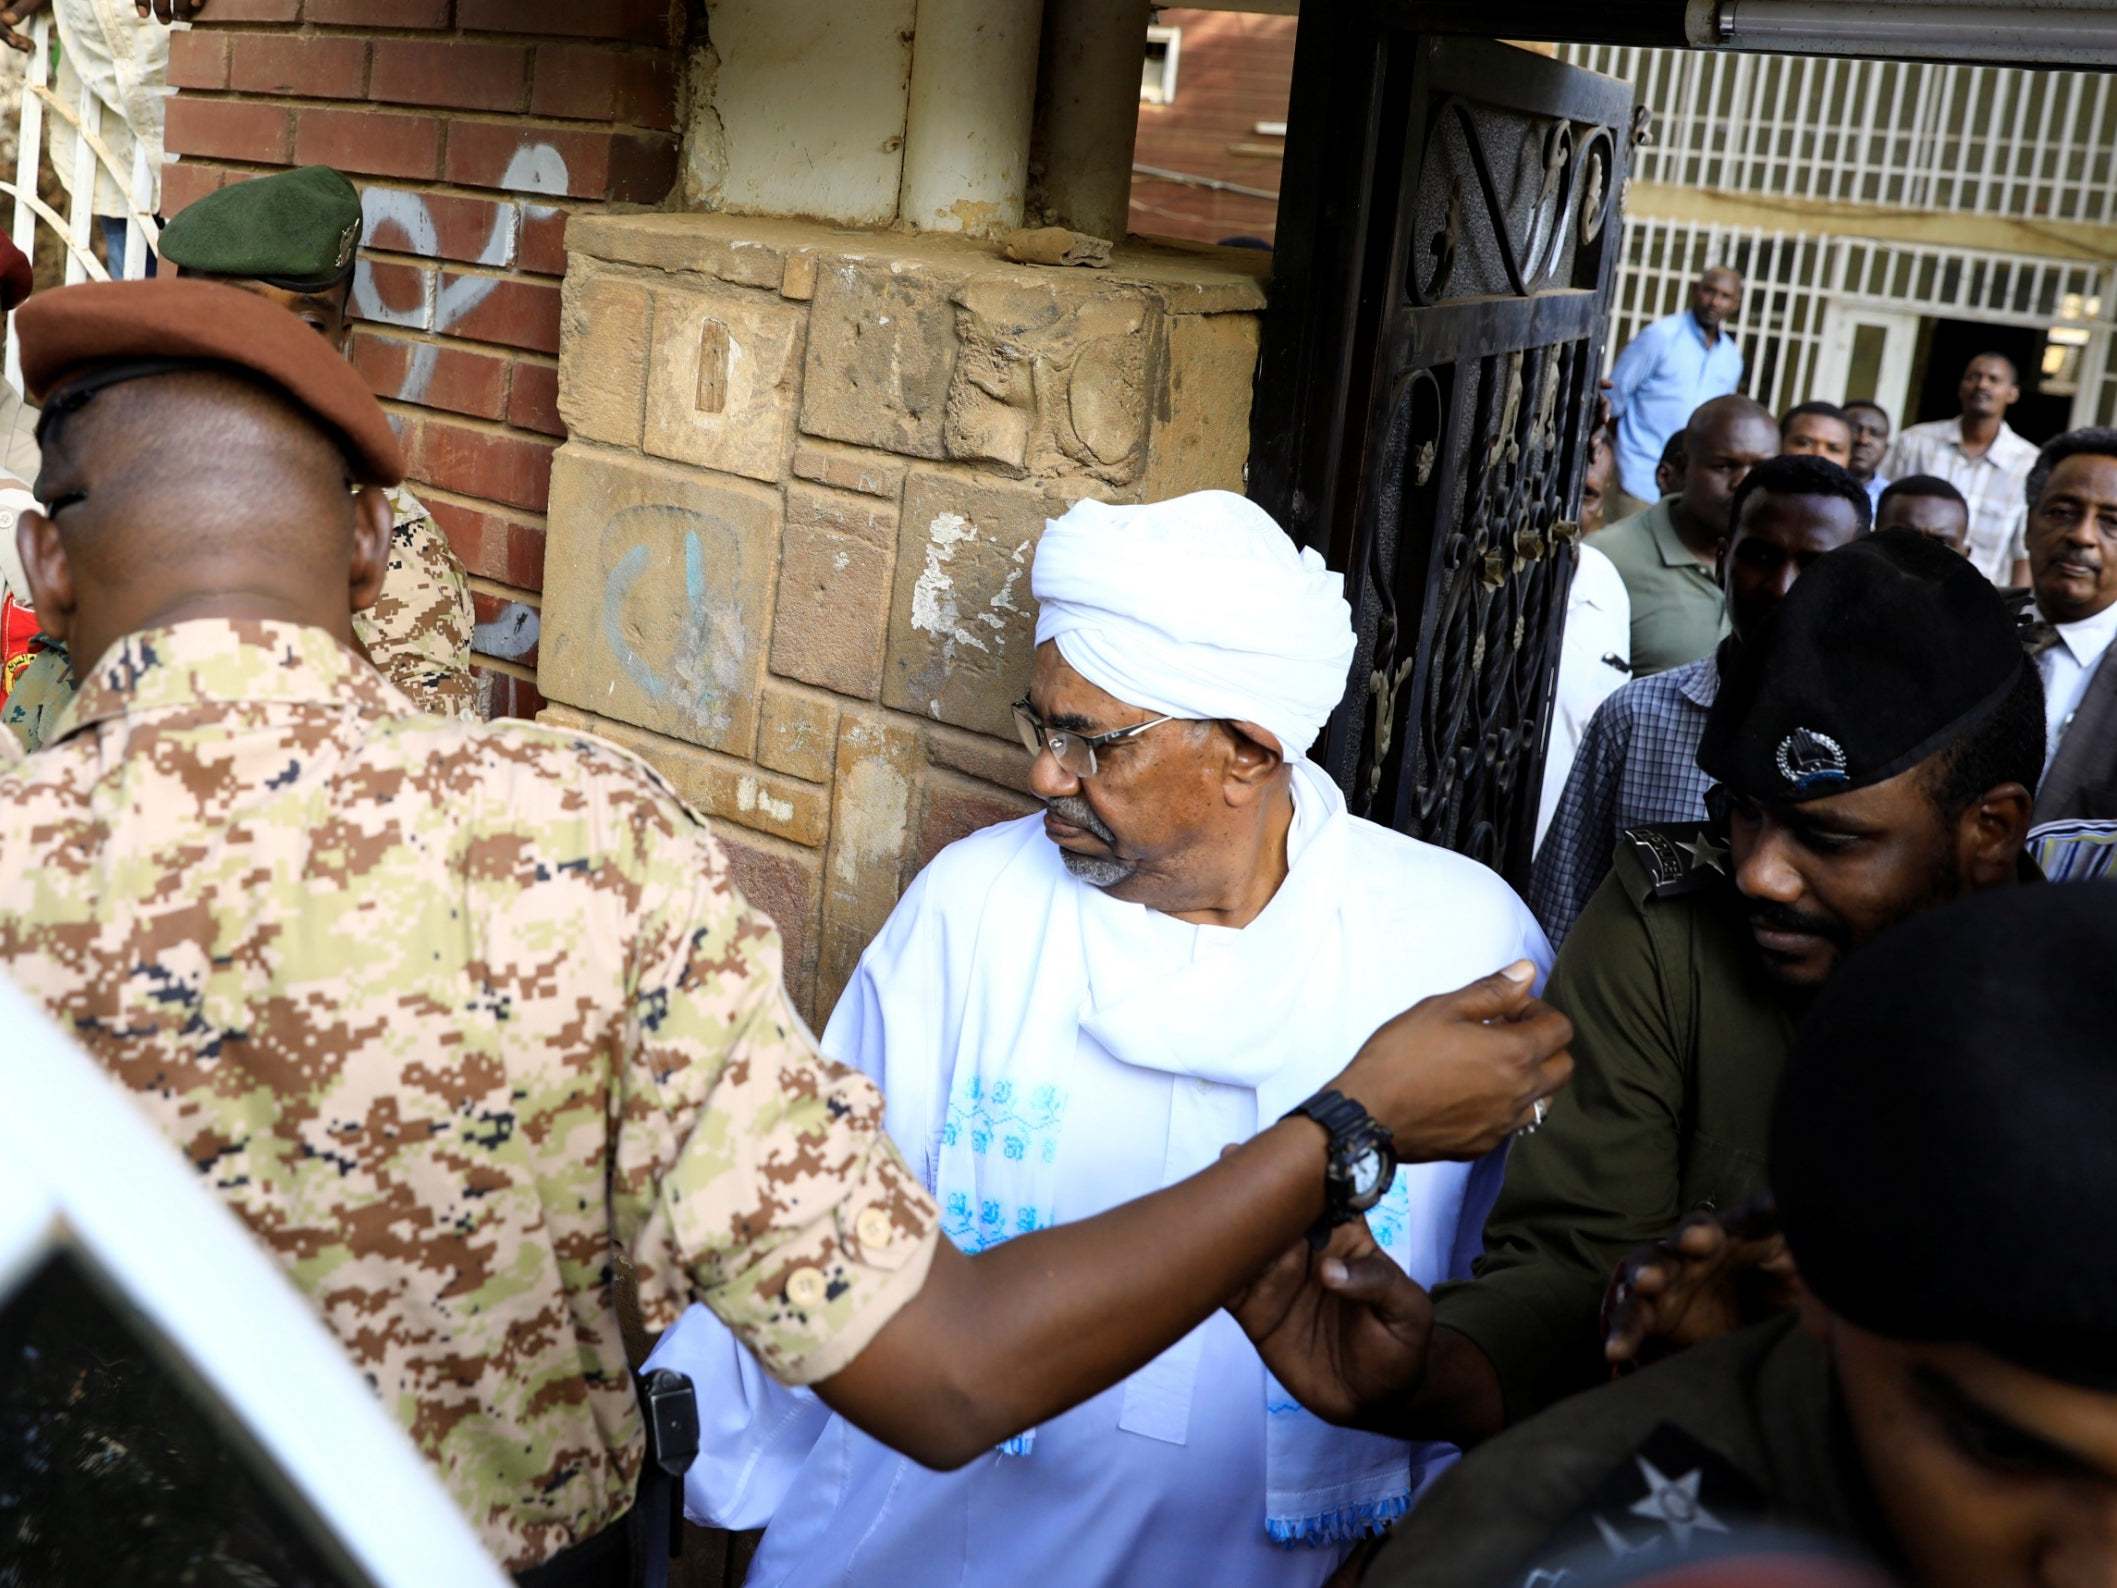 Sudan&apos;s former president Omar al-Bashir charged with corruption in first appearance since removal from power